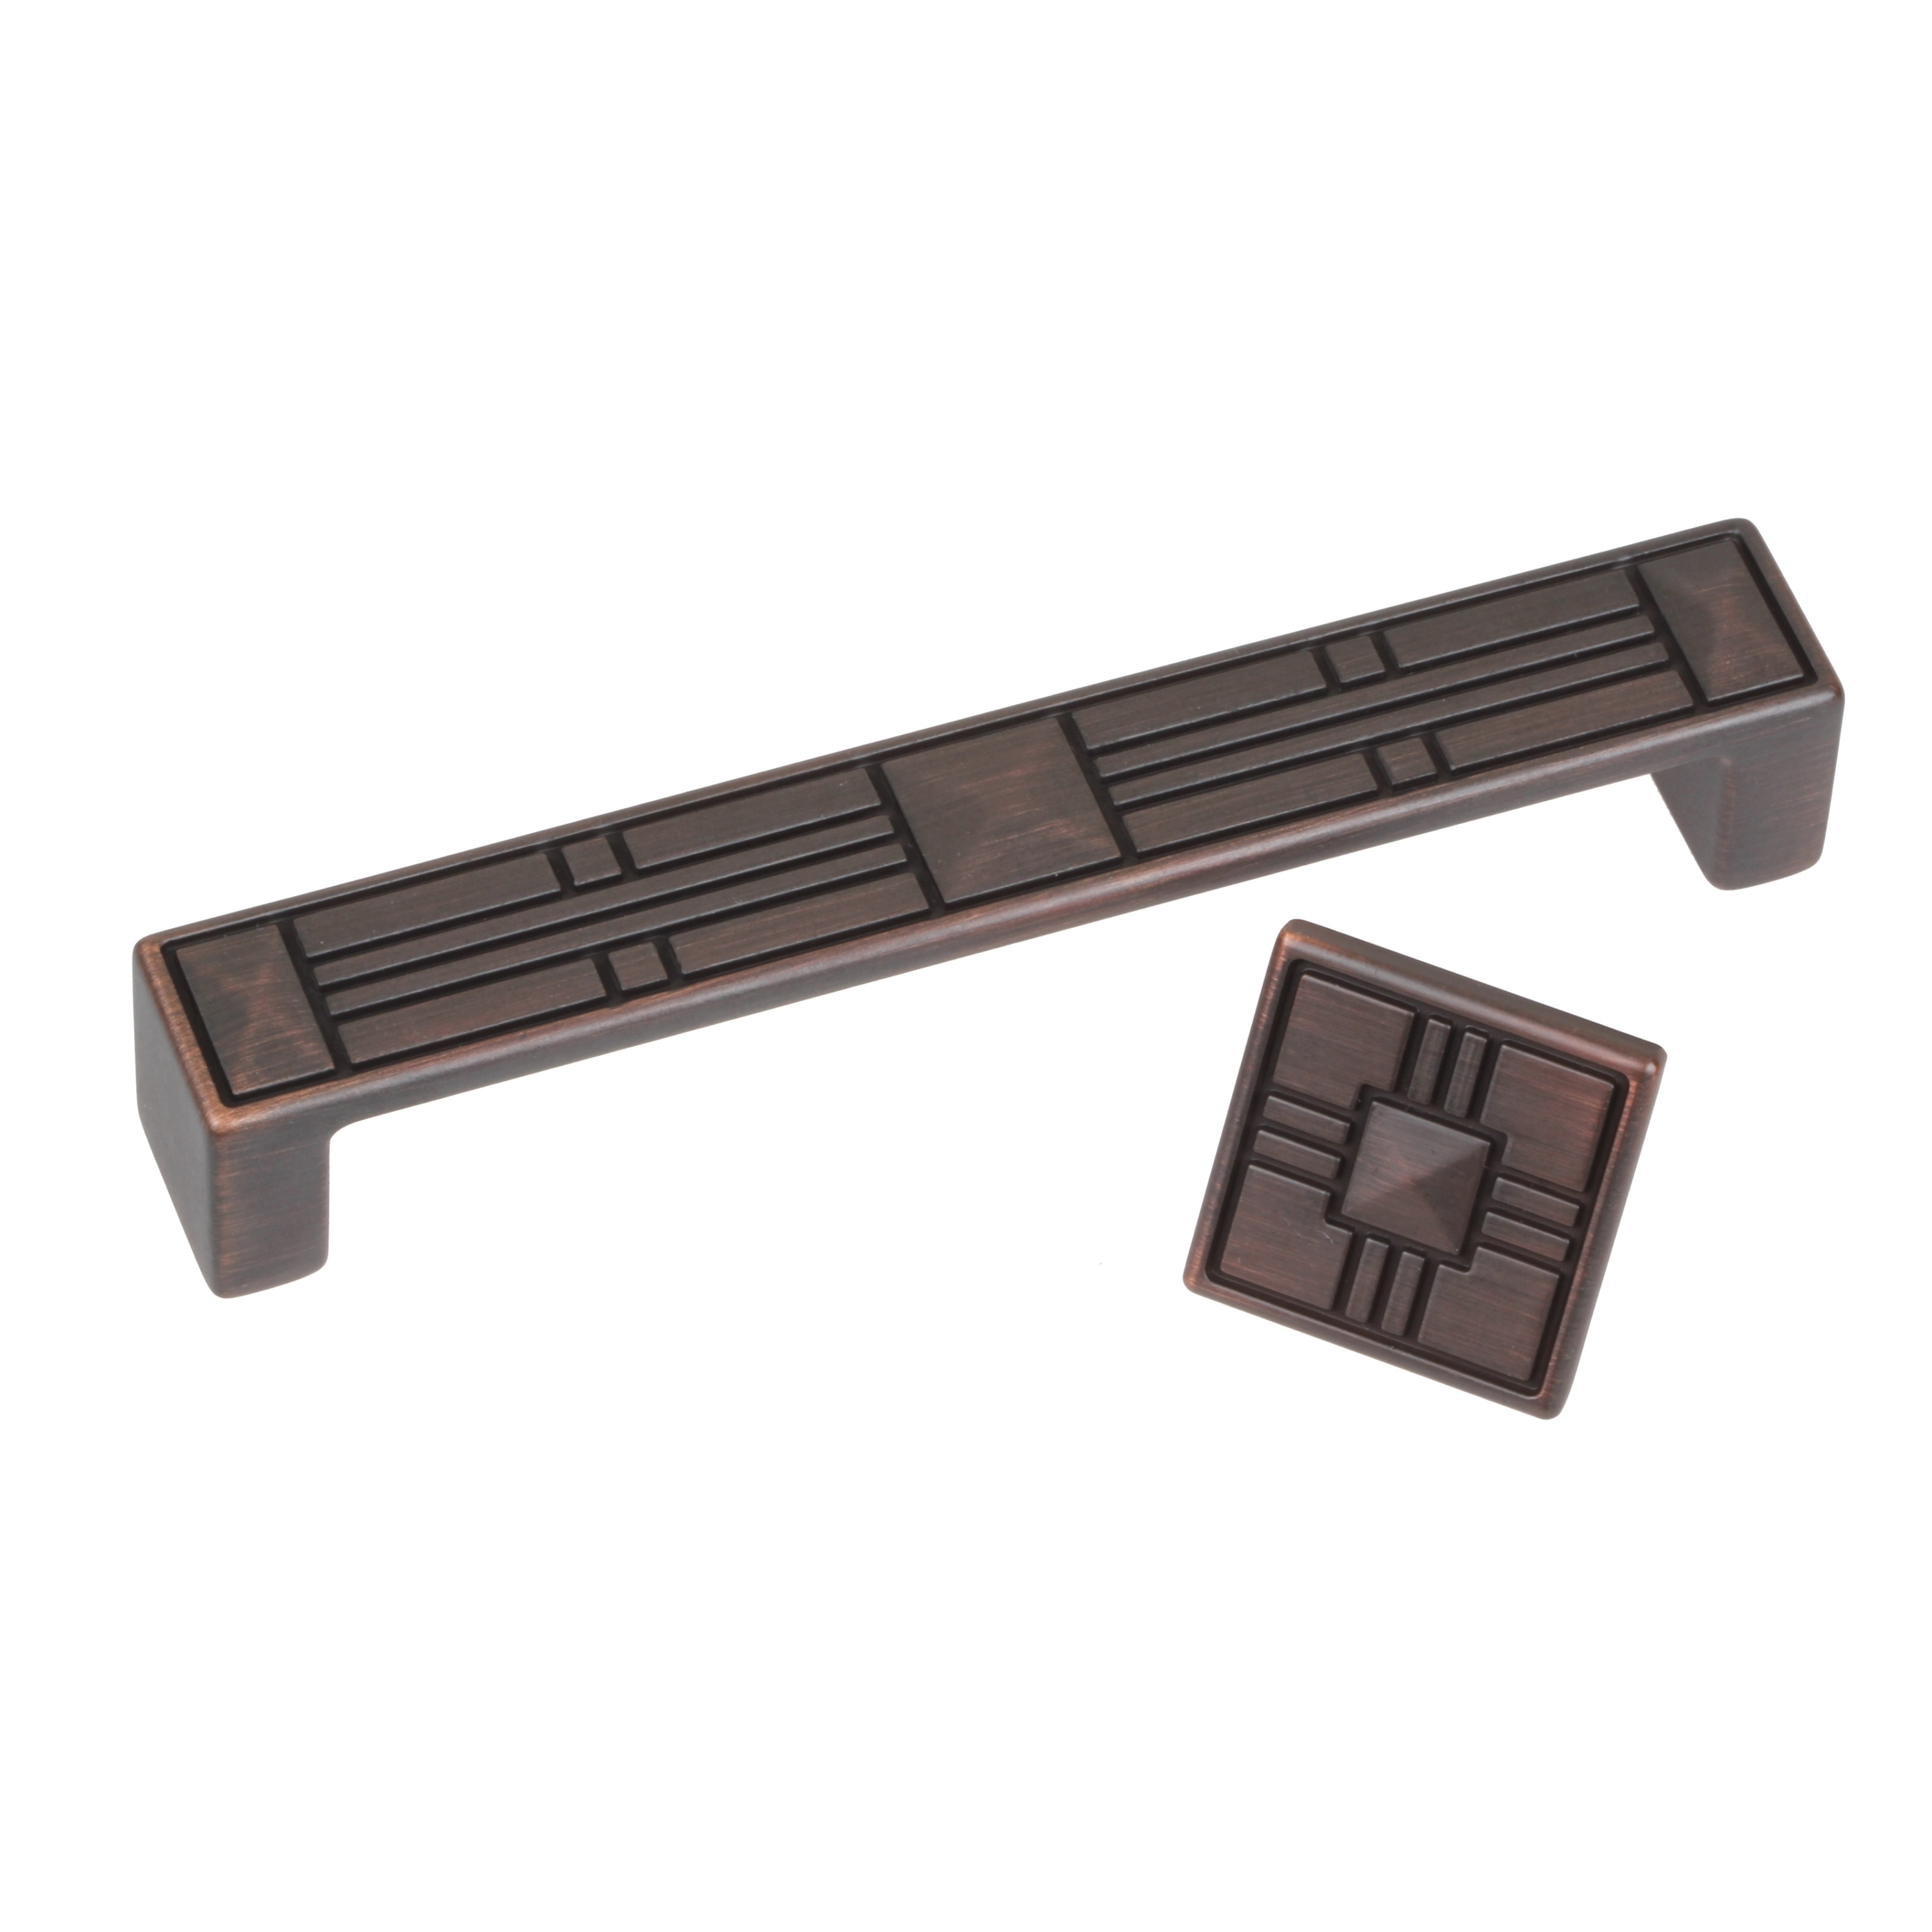 GlideRite 5 in. Center Modern Rectangular Flat Pyramid Pull Cabinet Hardware Handles, Oil Rubbed Bronze, Pack of 10 - image 4 of 4